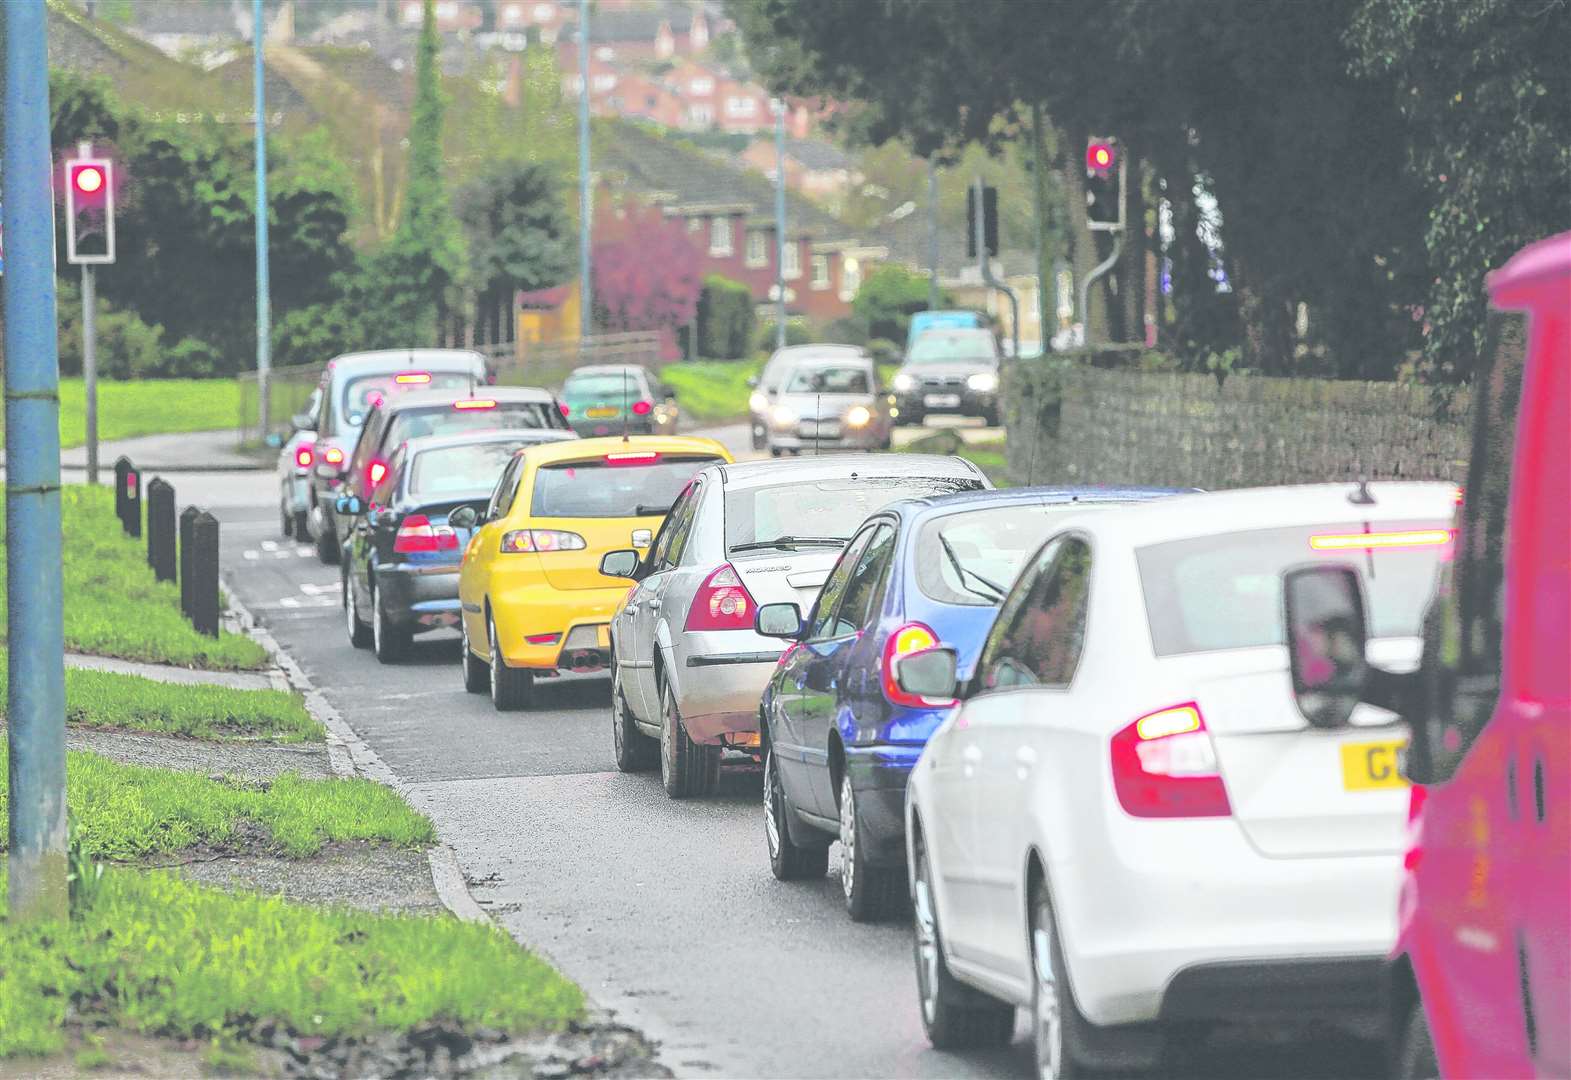 Maidstone Borough Council wants to improve traffic at six hot spots in the town